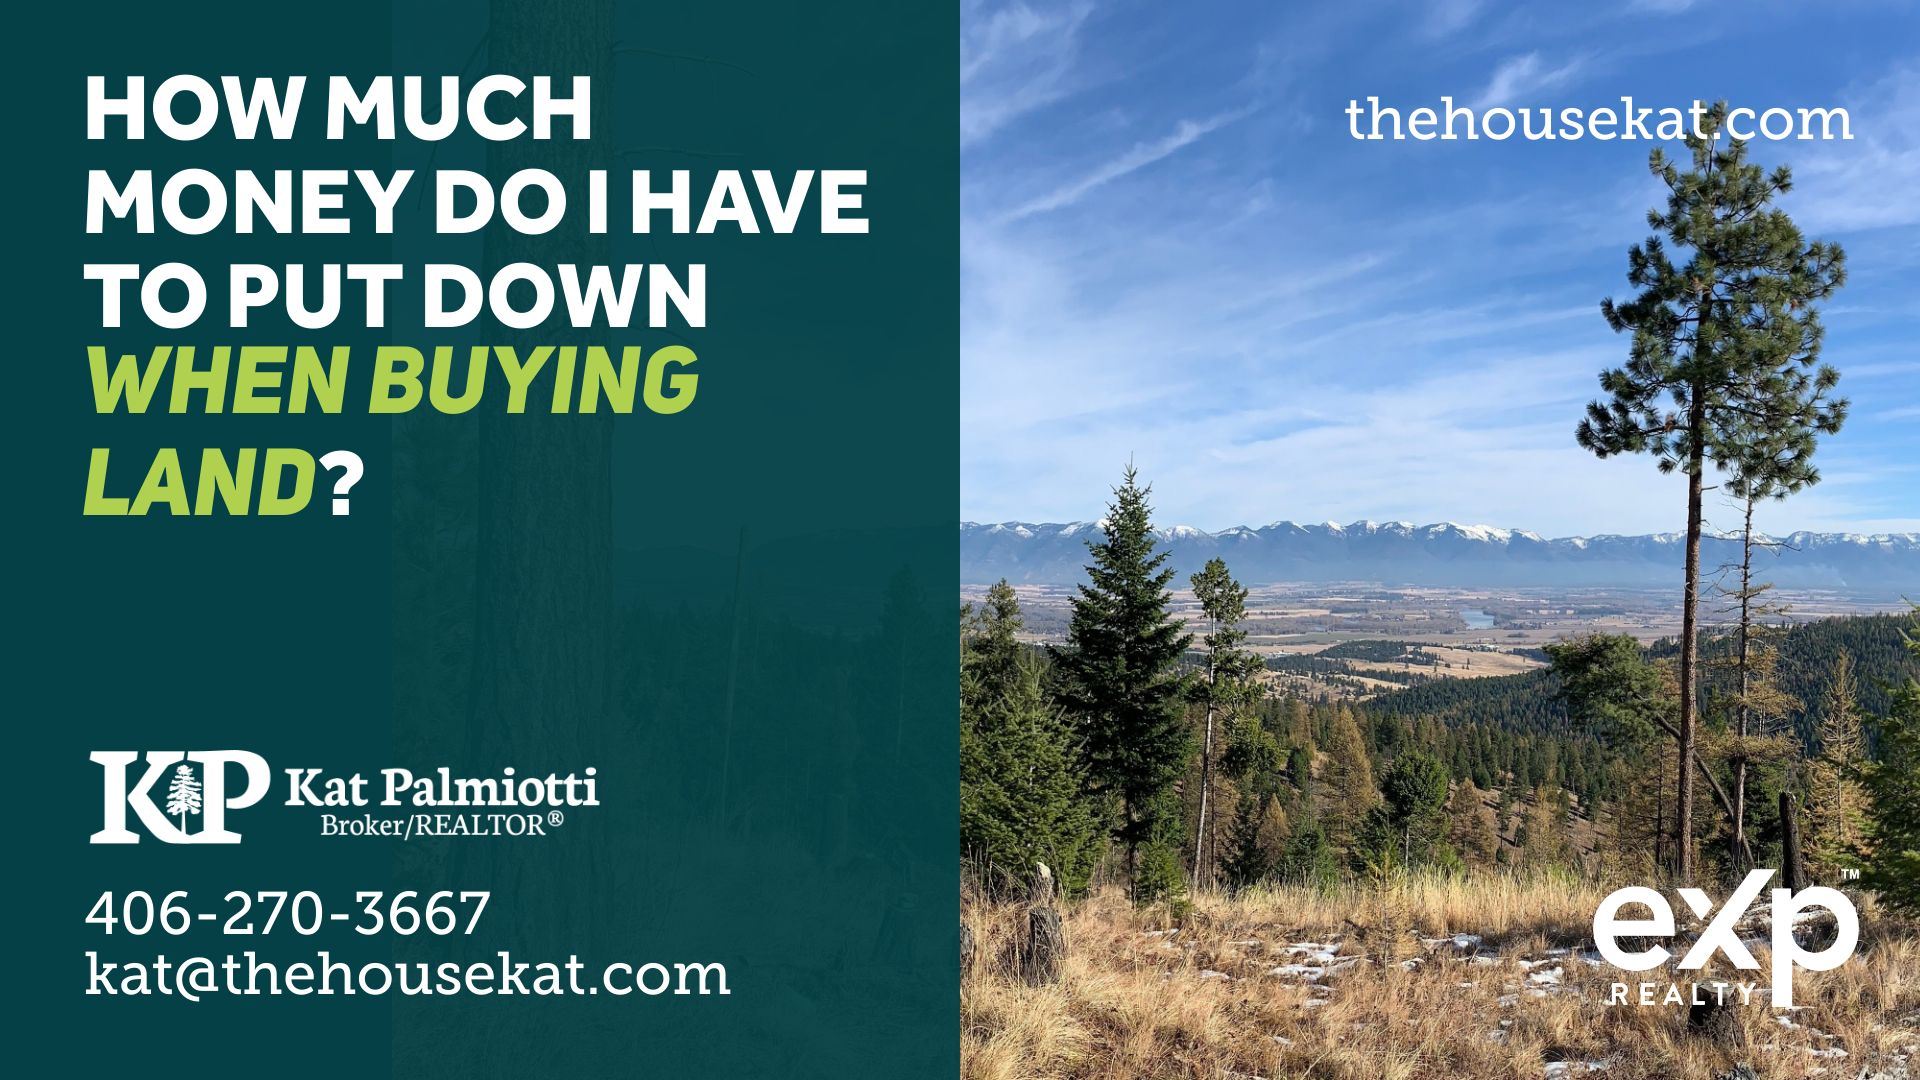 How much money do I have to put down when buying land?